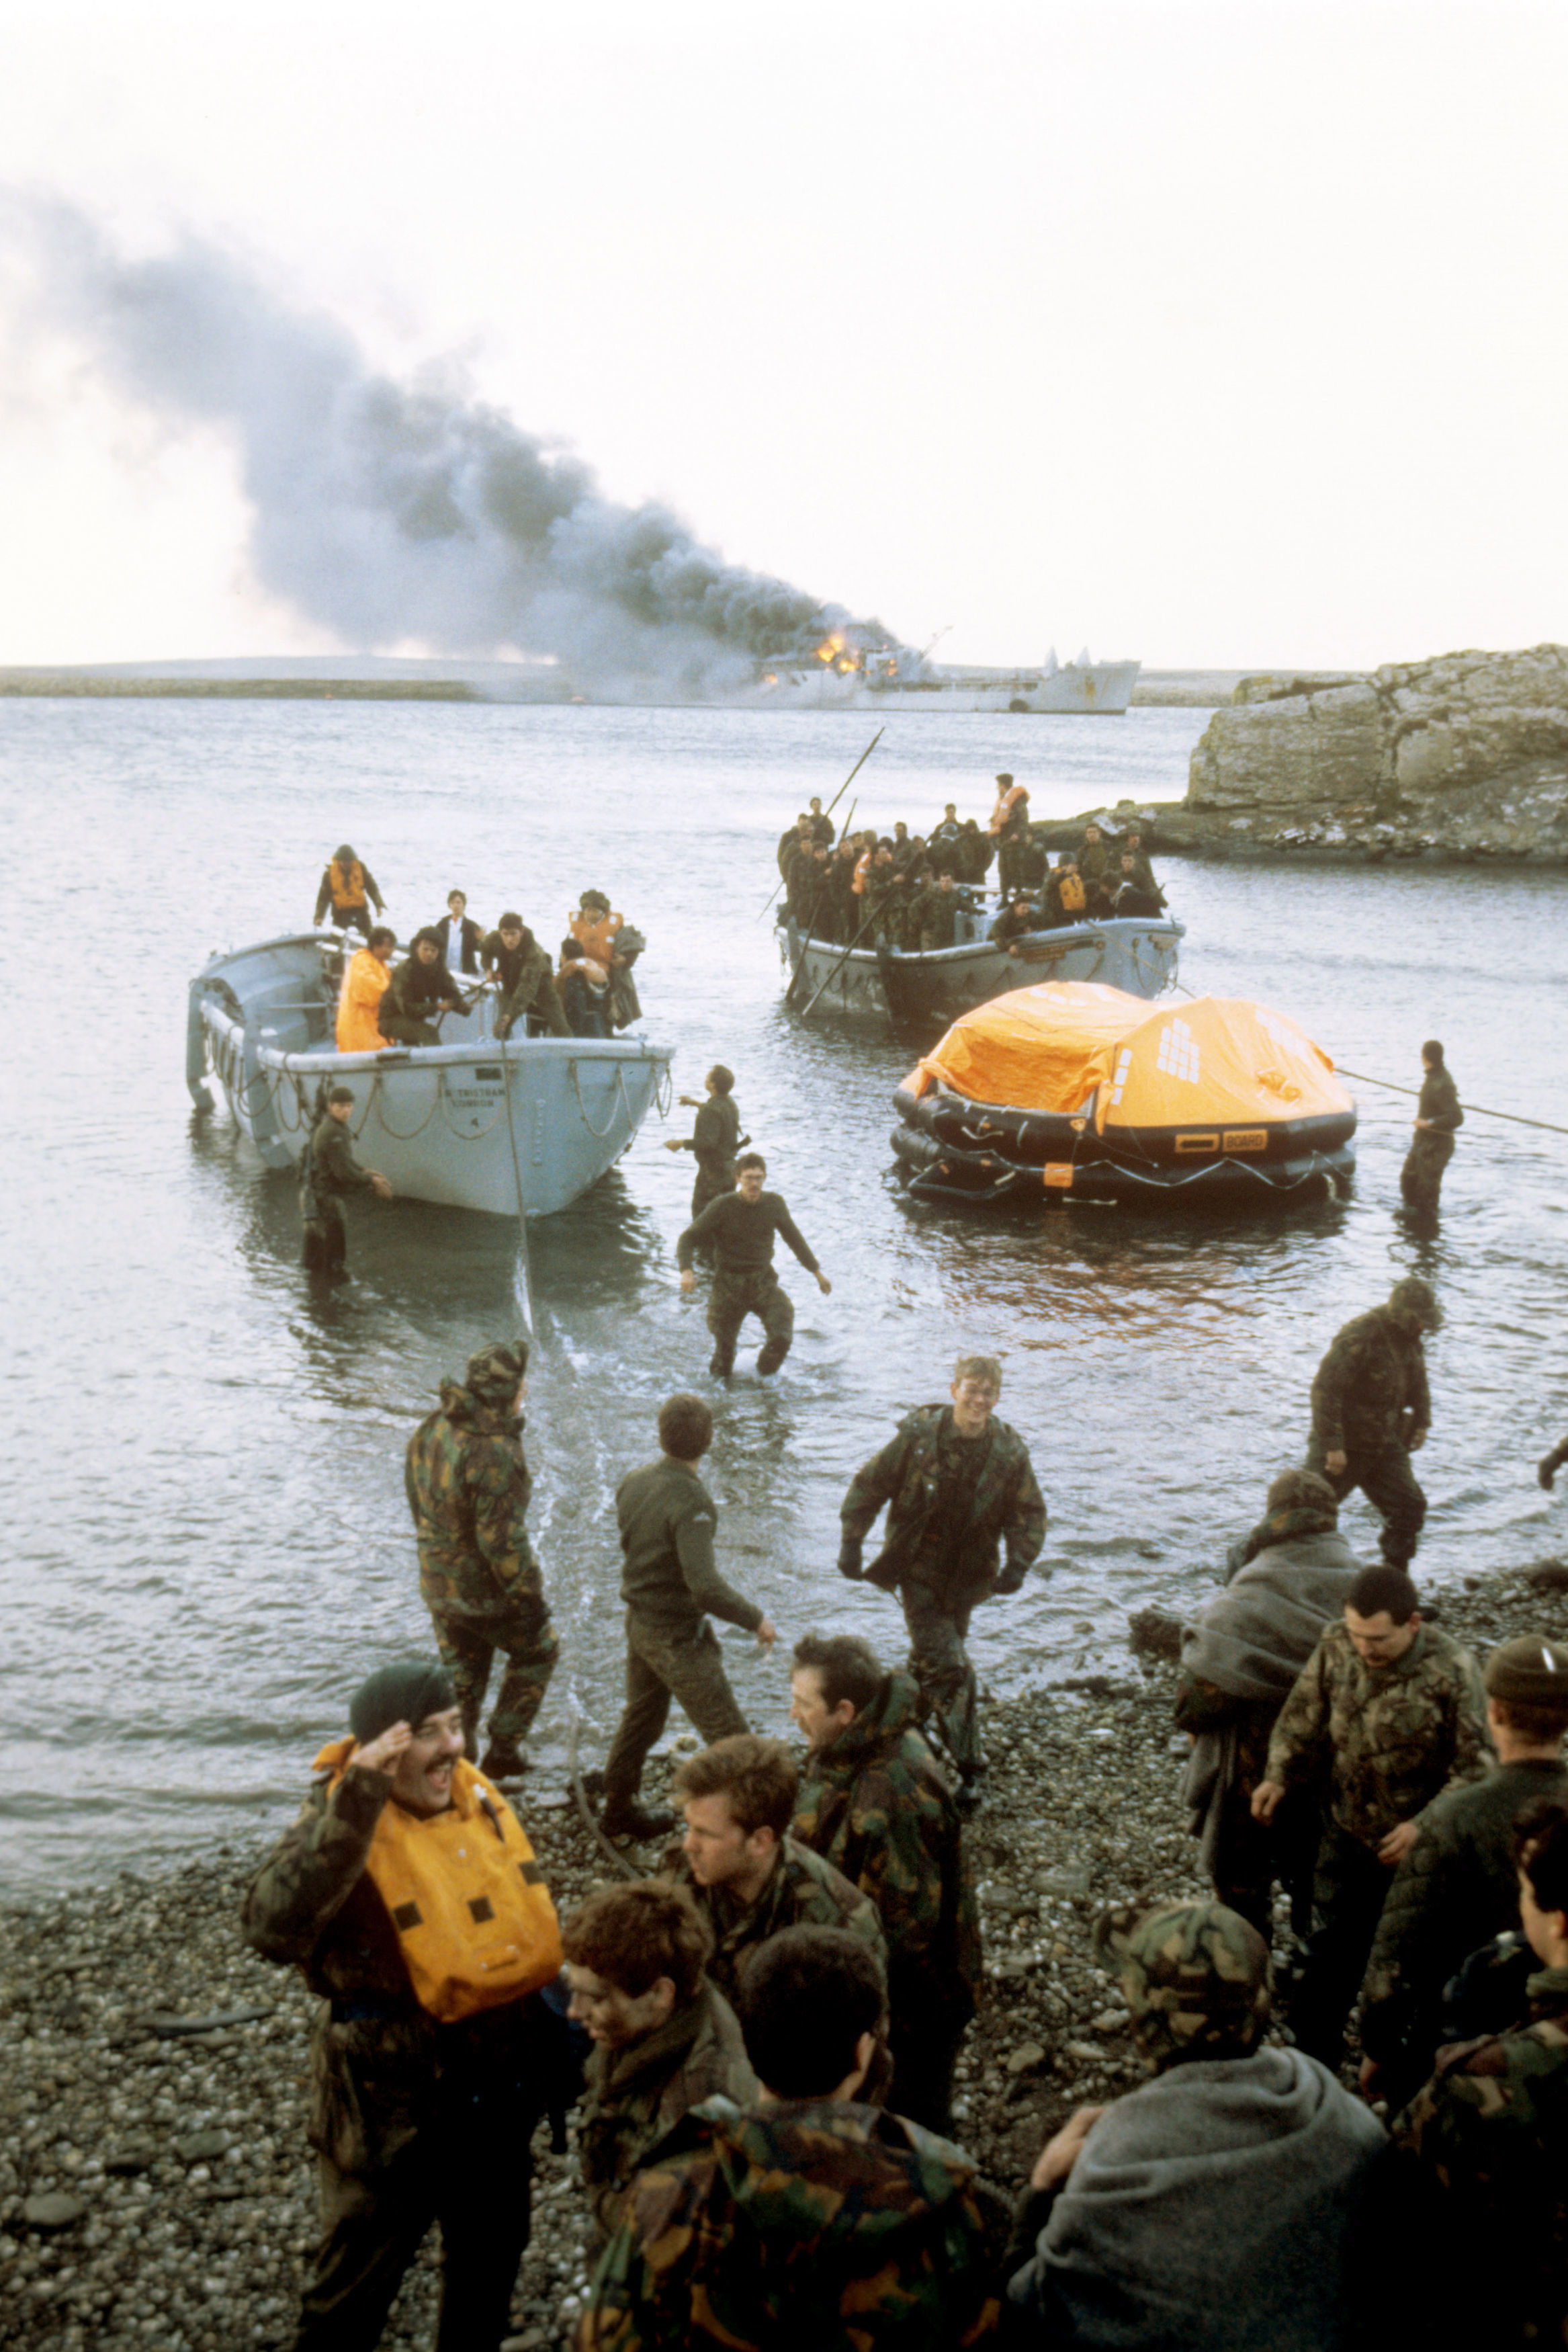 Argentinas invasion of the Falkland Islands was launched on April 2, 1982 (Photo - PA)